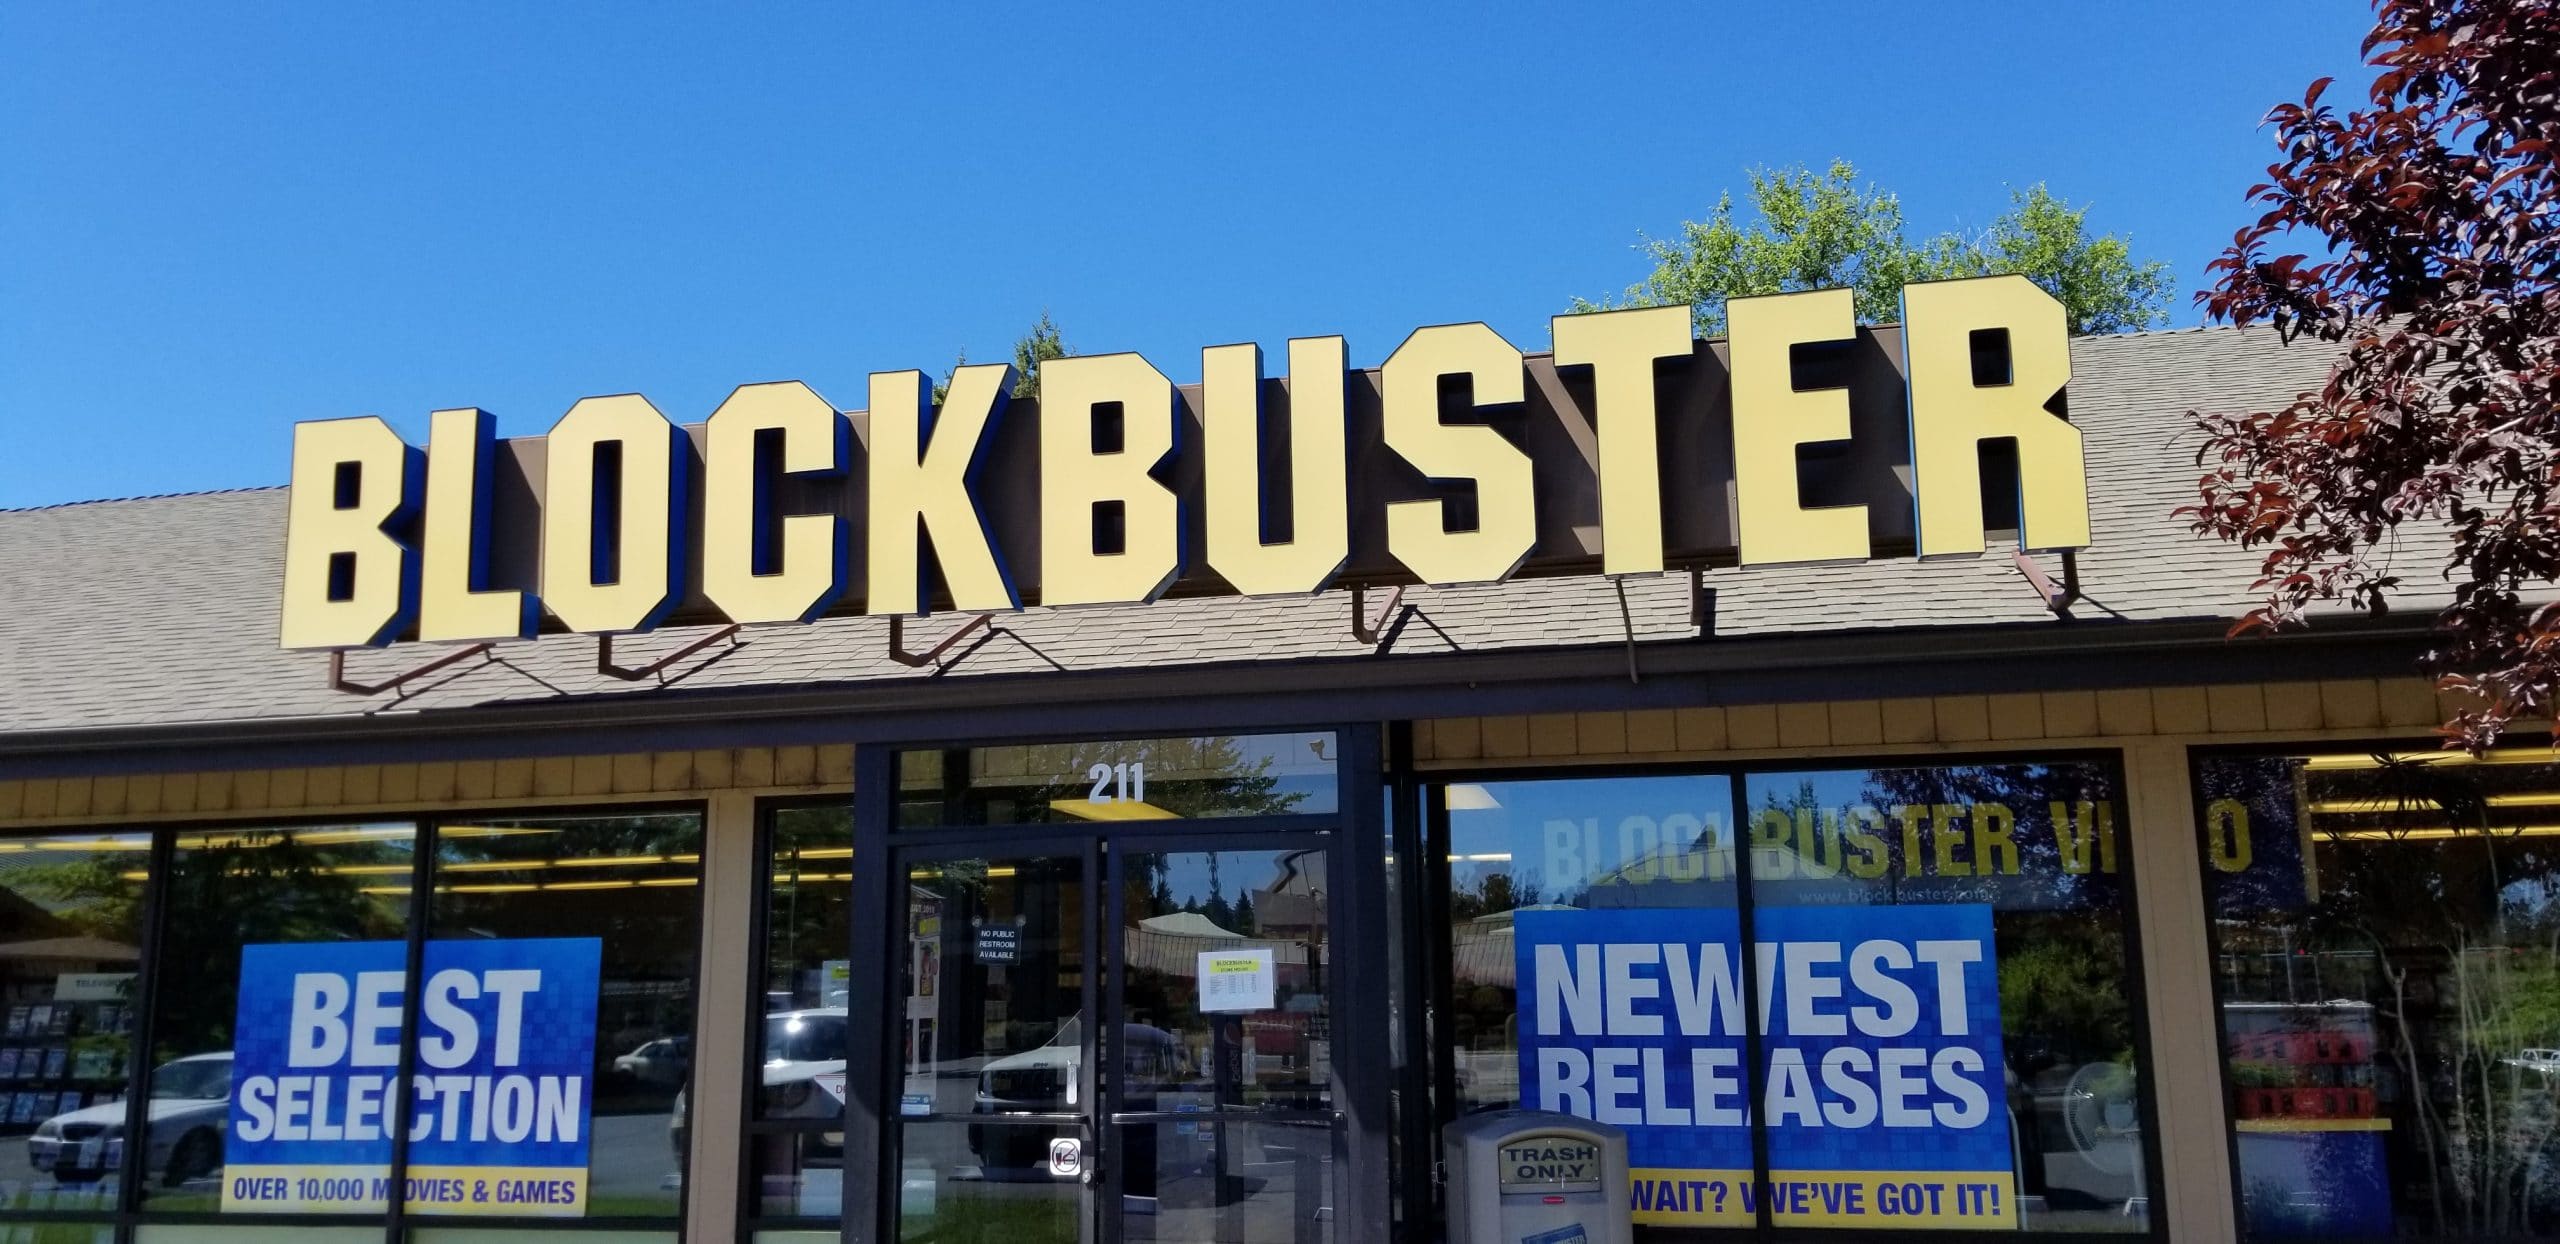 The last remaining Blockbuster store in Bend, Oregon 